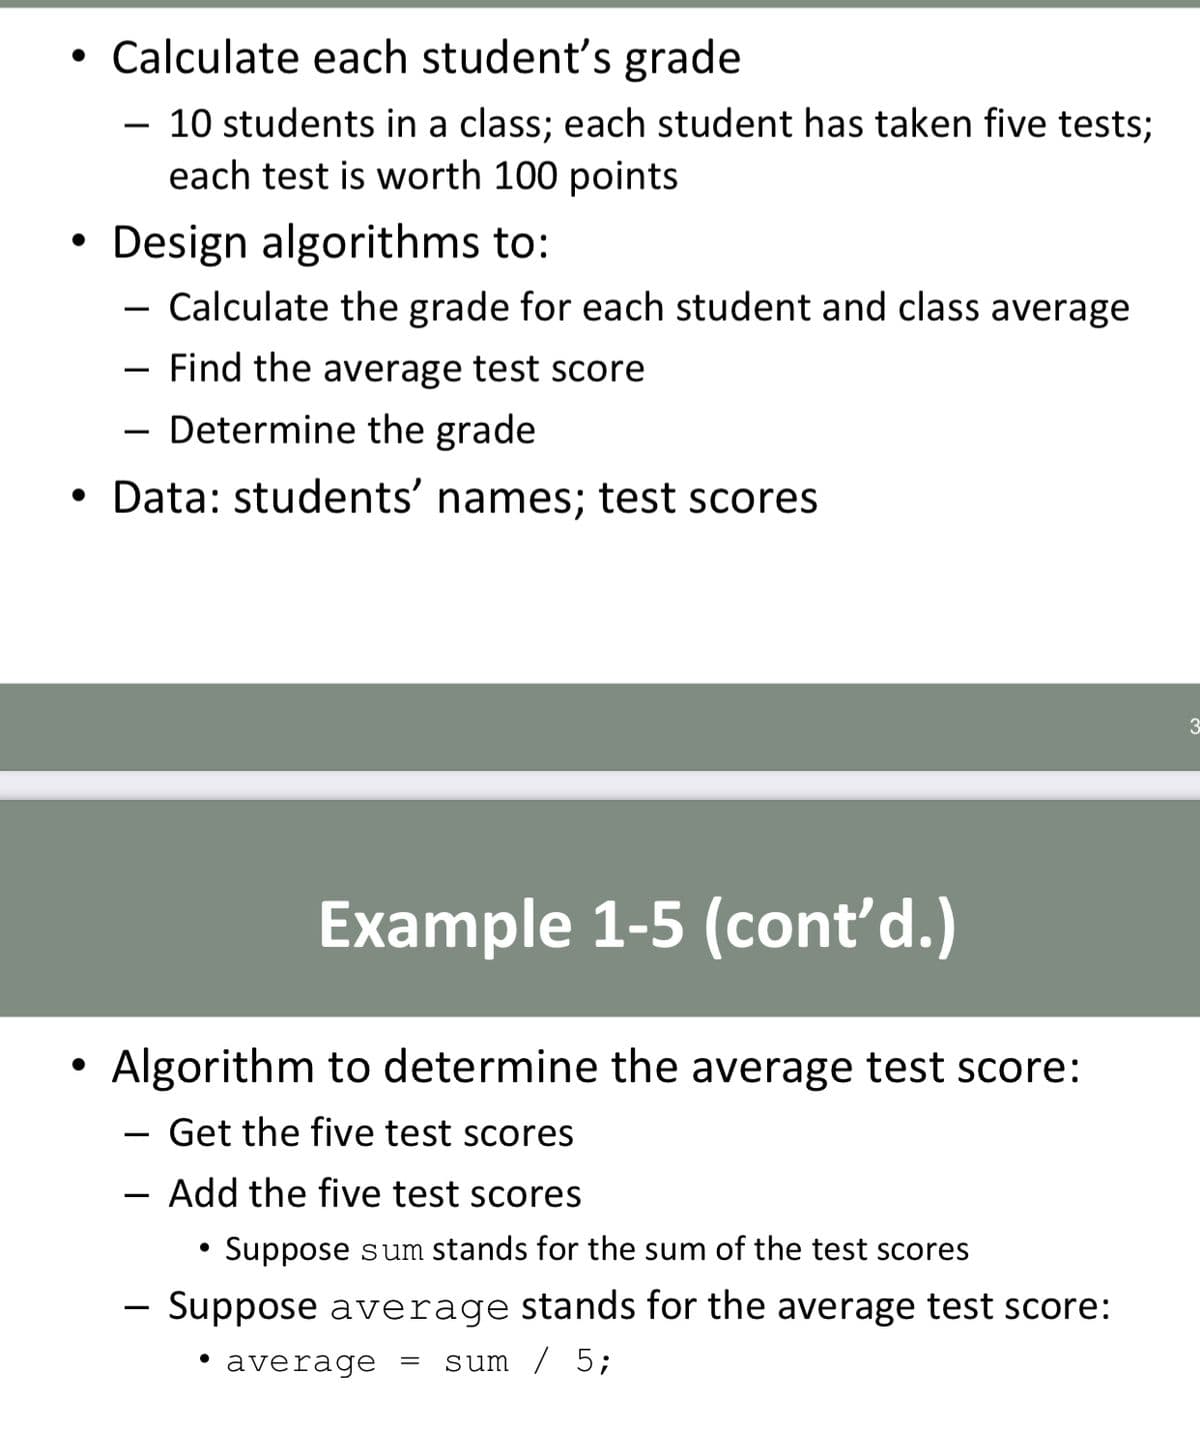 • Calculate each student's grade
10 students in a class; each student has taken five tests;
each test is worth 100 points
Design algorithms to:
- Calculate the grade for each student and class average
Find the average test score
- Determine the grade
• Data: students' names; test scores
Example 1-5 (cont'd.)
Algorithm to determine the average test score:
Get the five test scores
Add the five test scores
Suppose sum stands for the sum of the test scores
Suppose average stands for the average test score:
• average
sum / 5;
